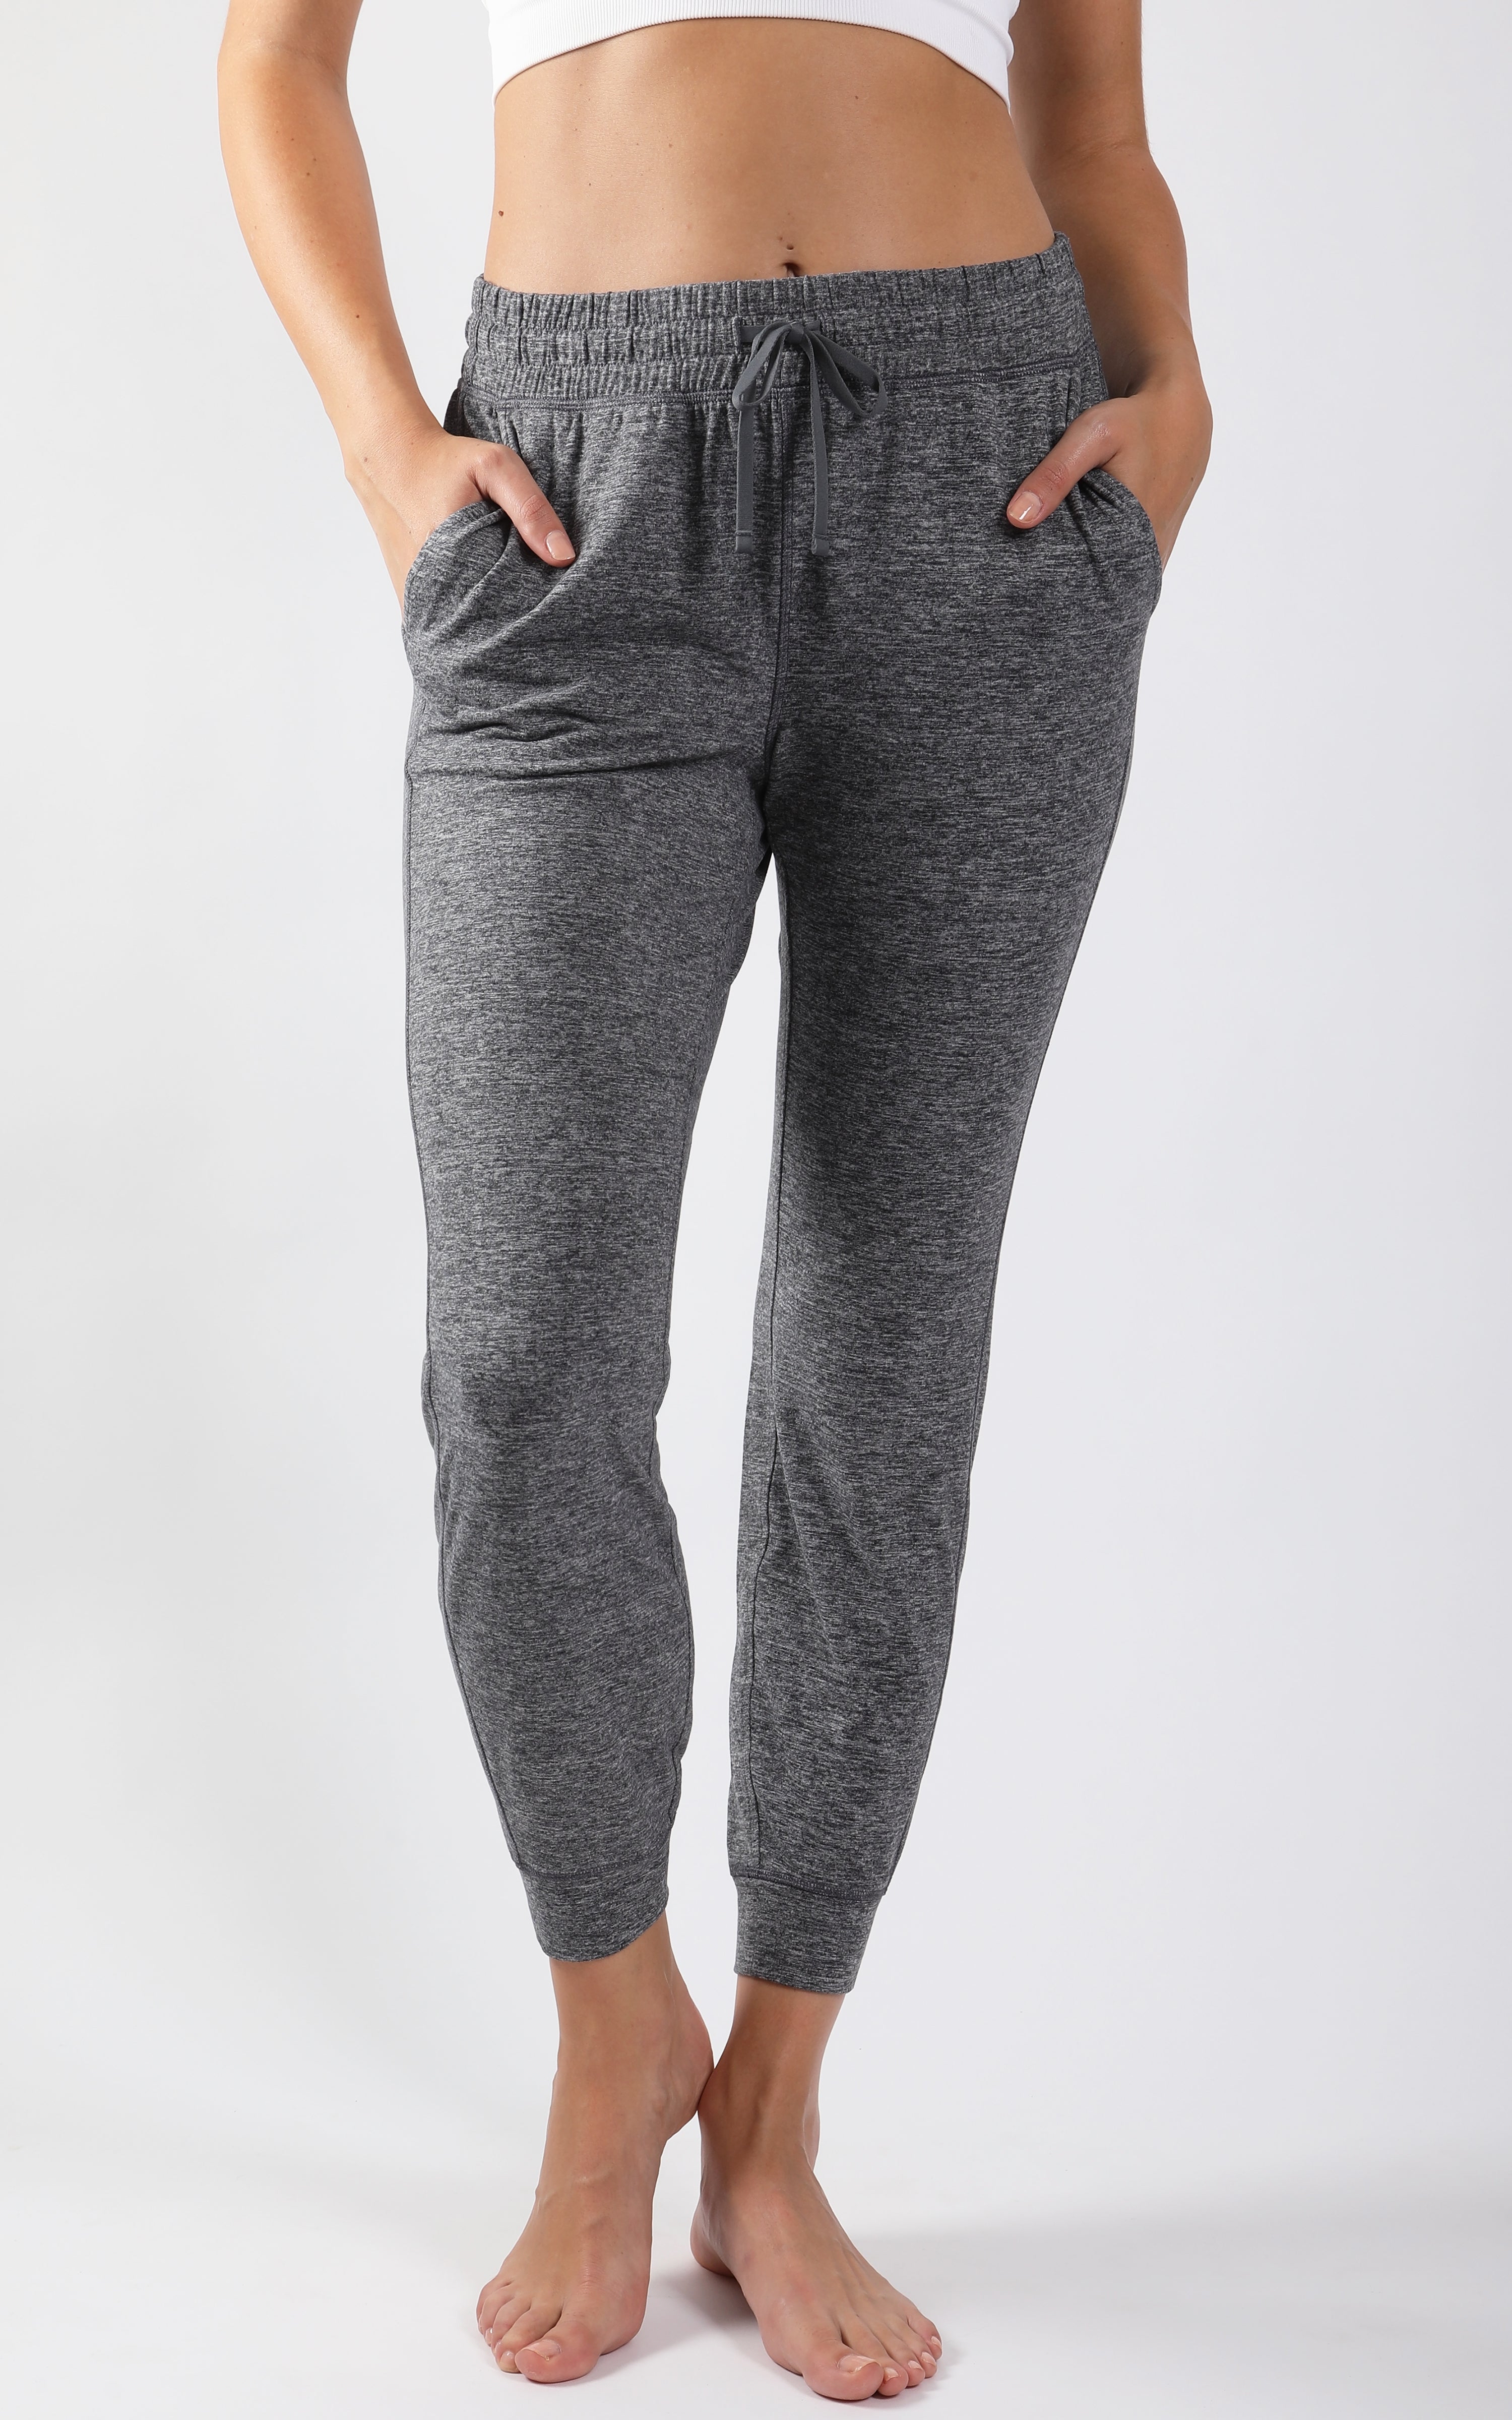 90 DEGREE BY REFLEX Snap Button Side Pocket Joggers